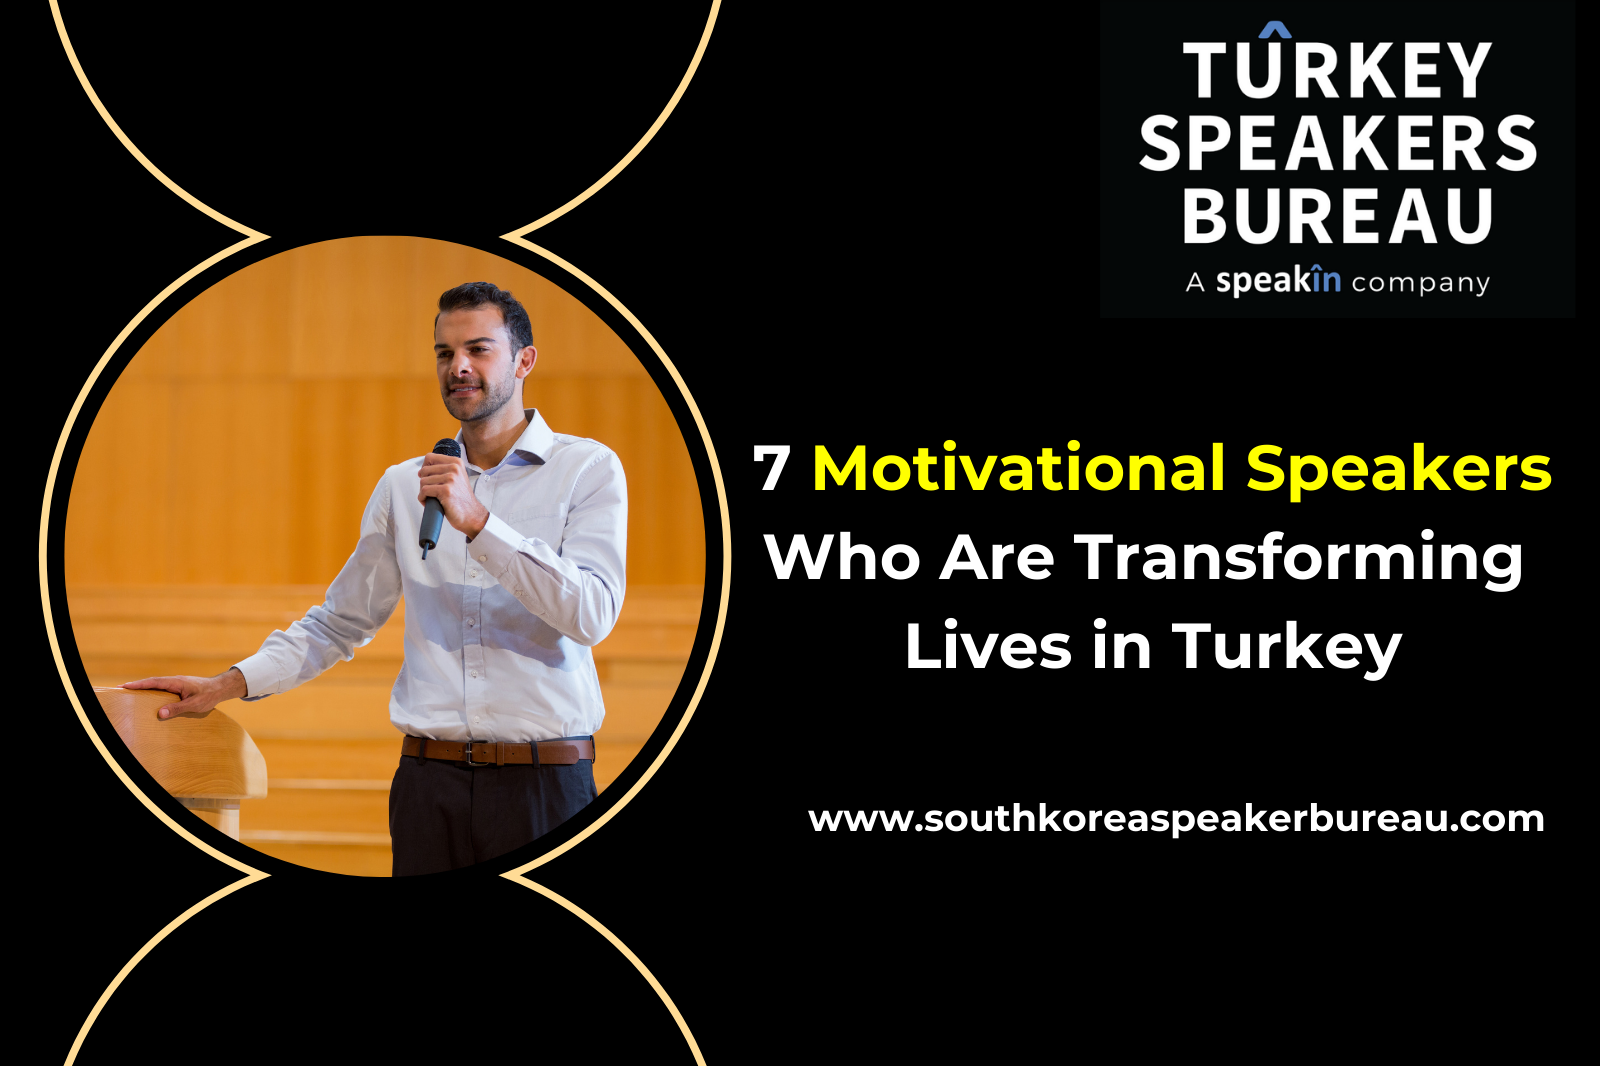 7 Motivational Speakers Who Are Transforming Lives in Turkey